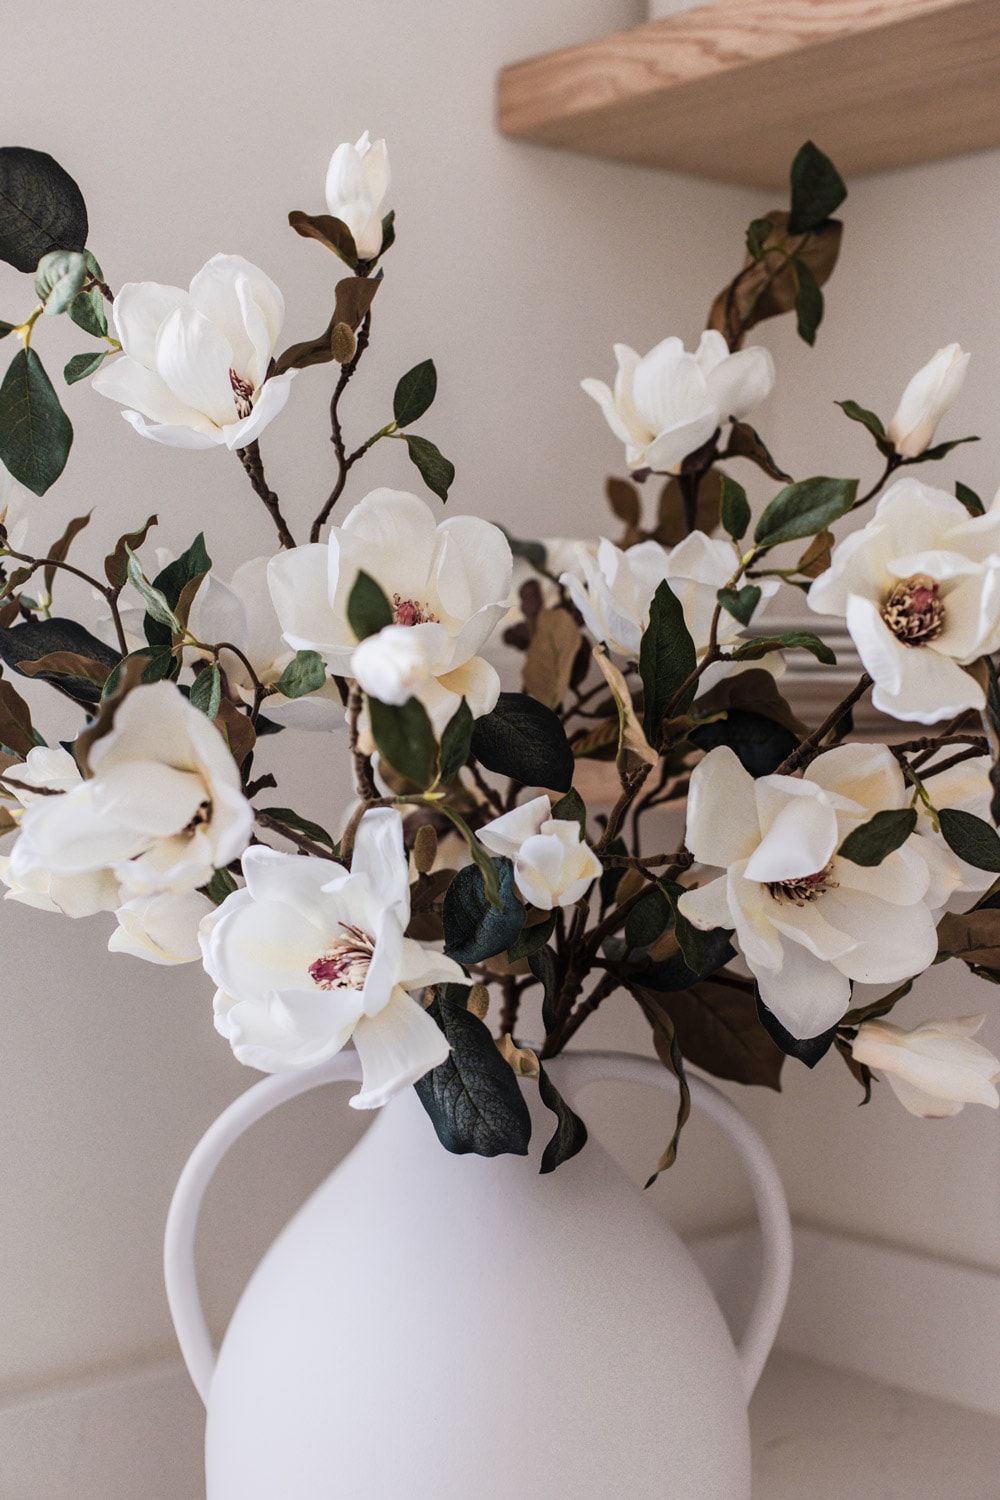 Favorite faux spring flowers and branches - Jenna Sue Design